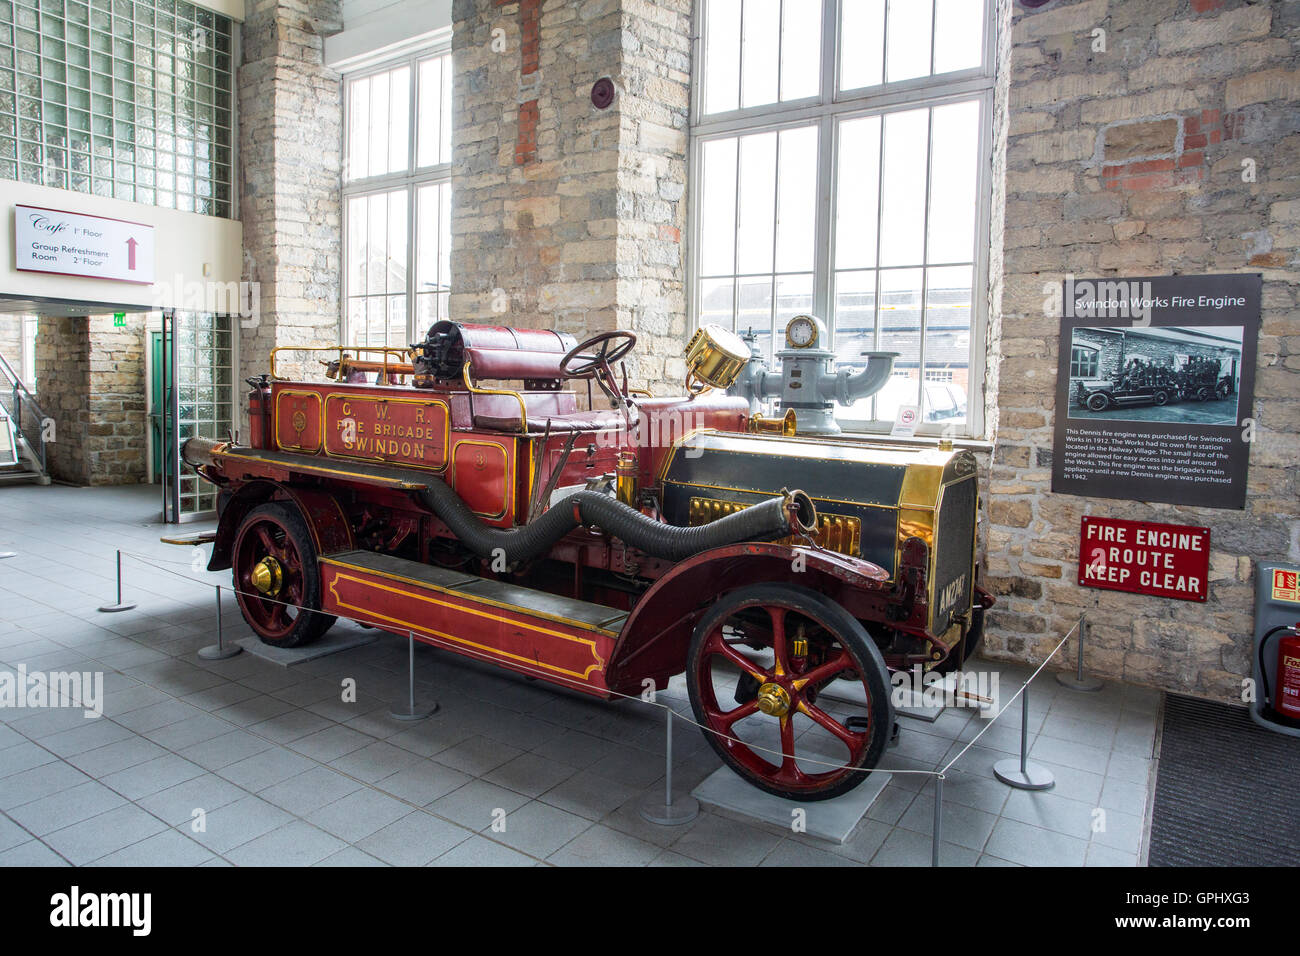 The former GWR Swindon Works 1912 fire engine at the Steam Museum, Swindon, Wiltshire, England, UK Stock Photo